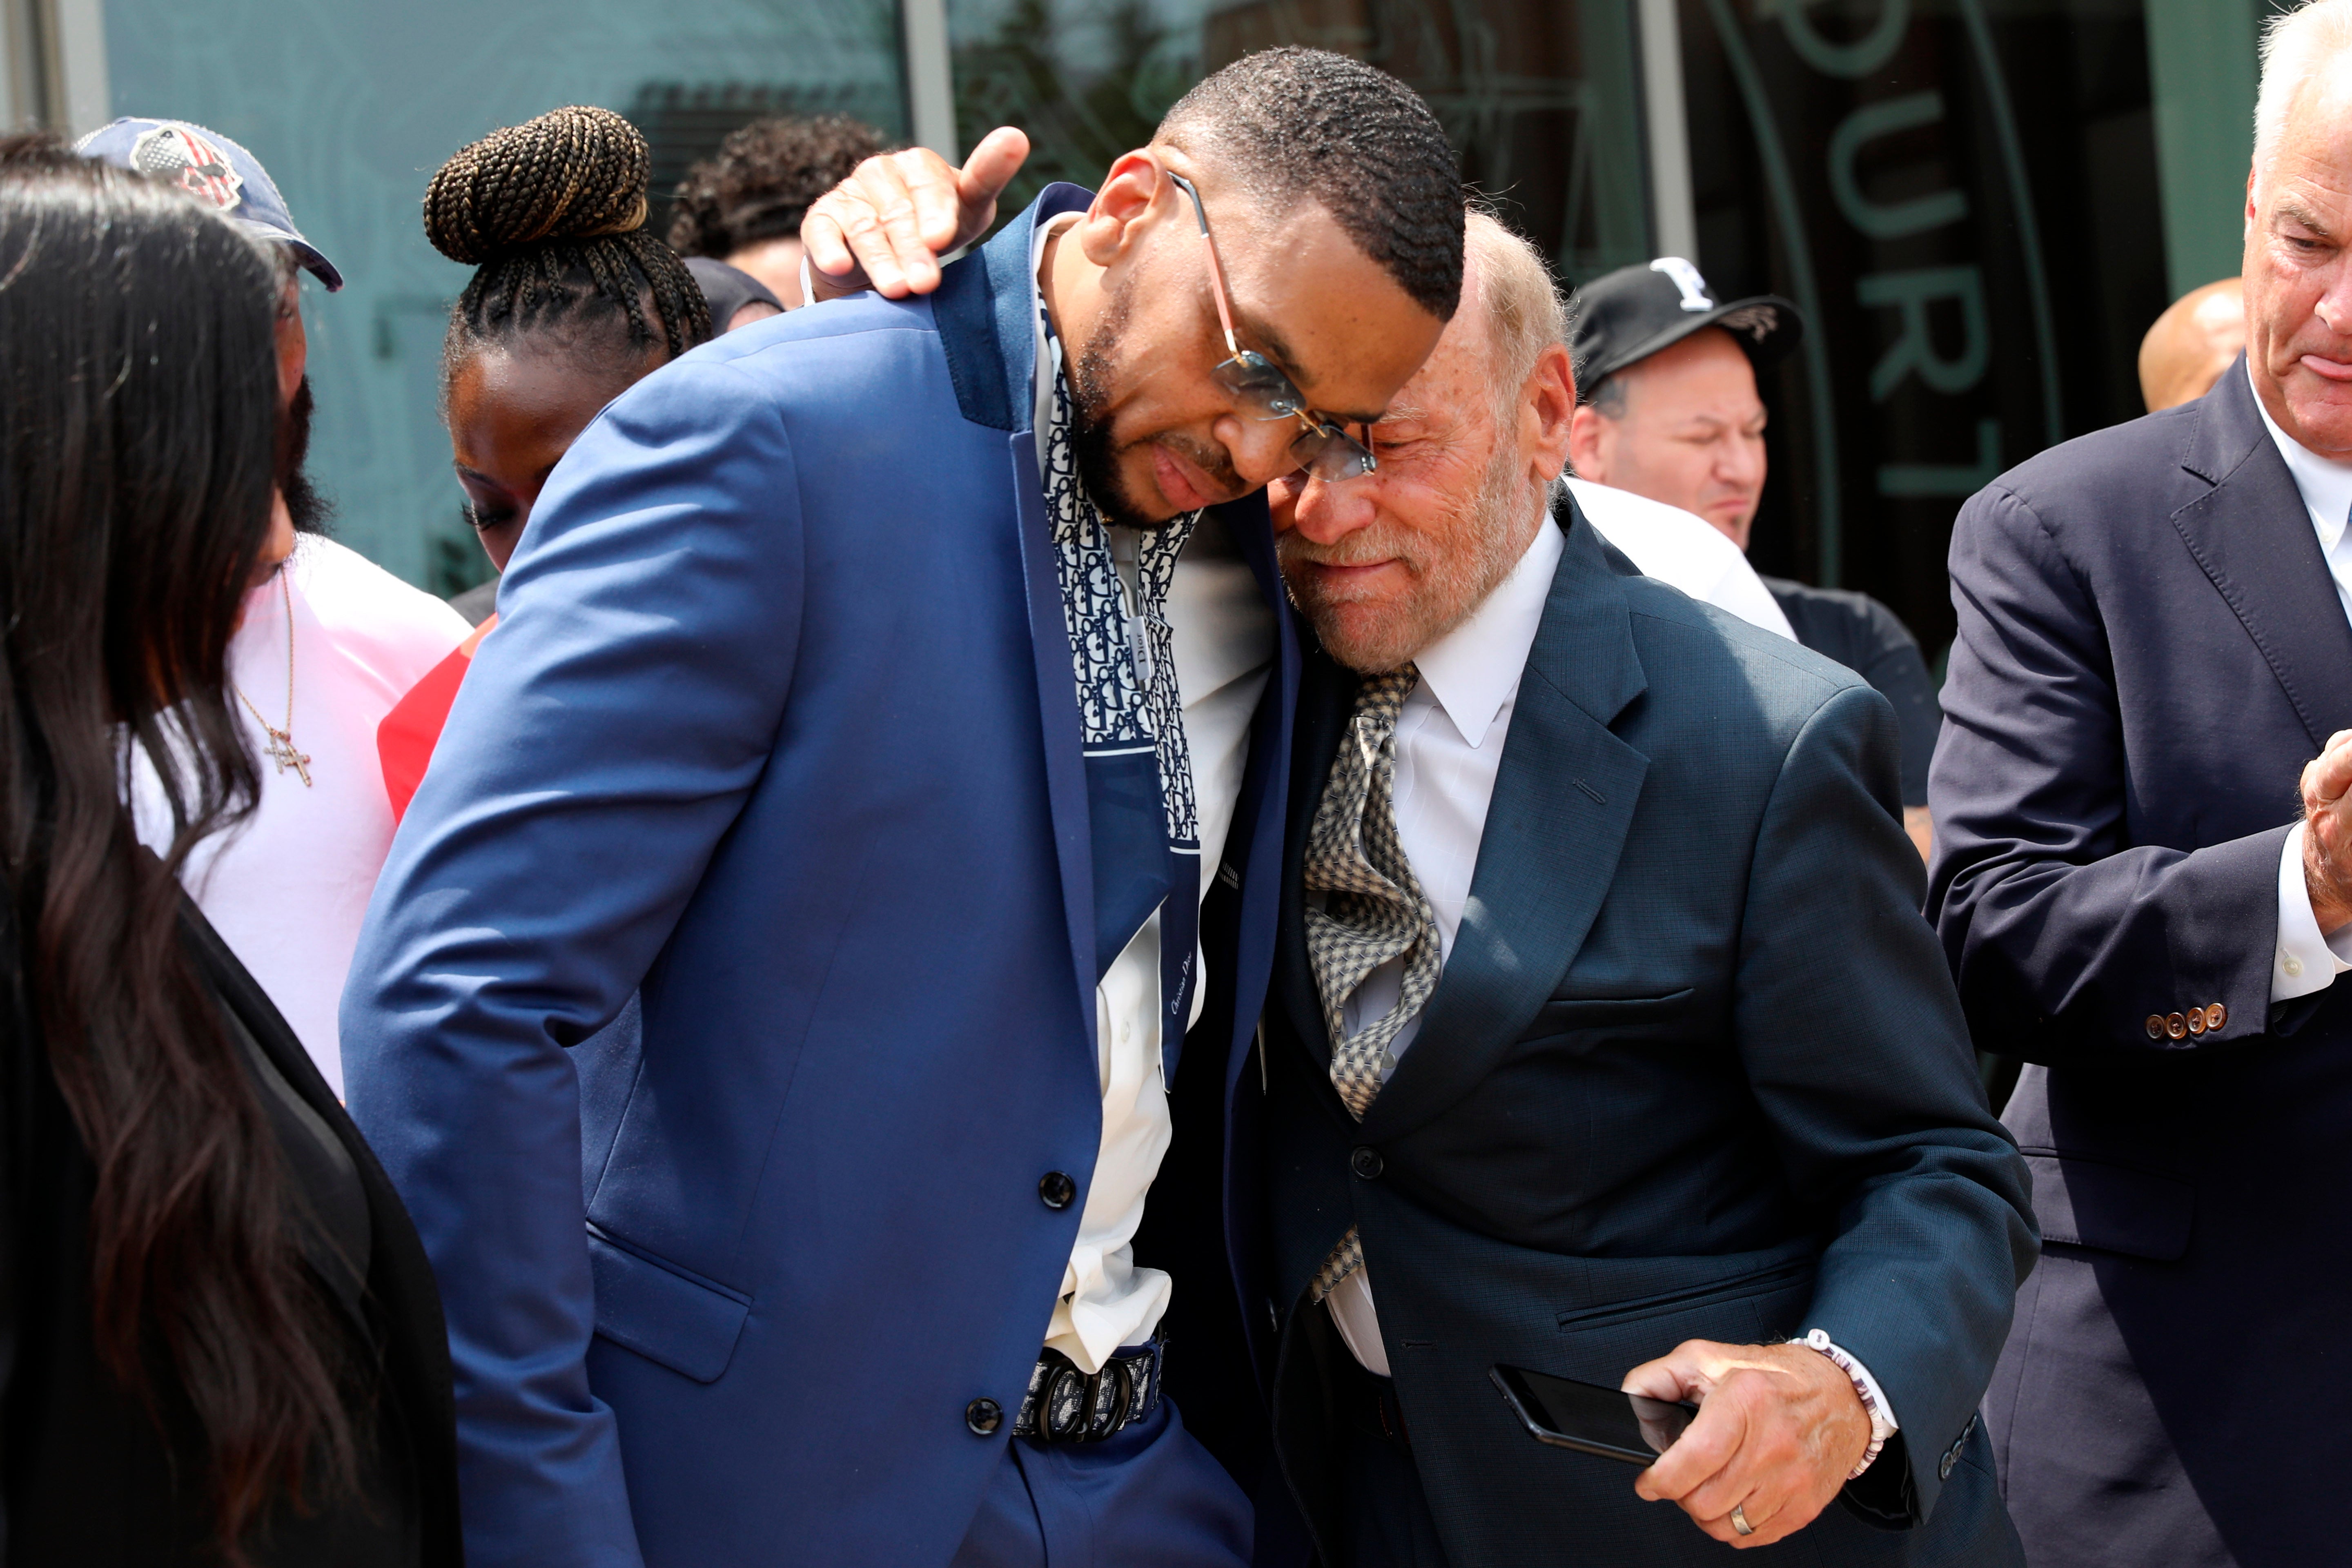 Grant Williams, left center, is embraced by his attorney Irving Cohen after his murder conviction is vacated, July 22, 2021, in New York